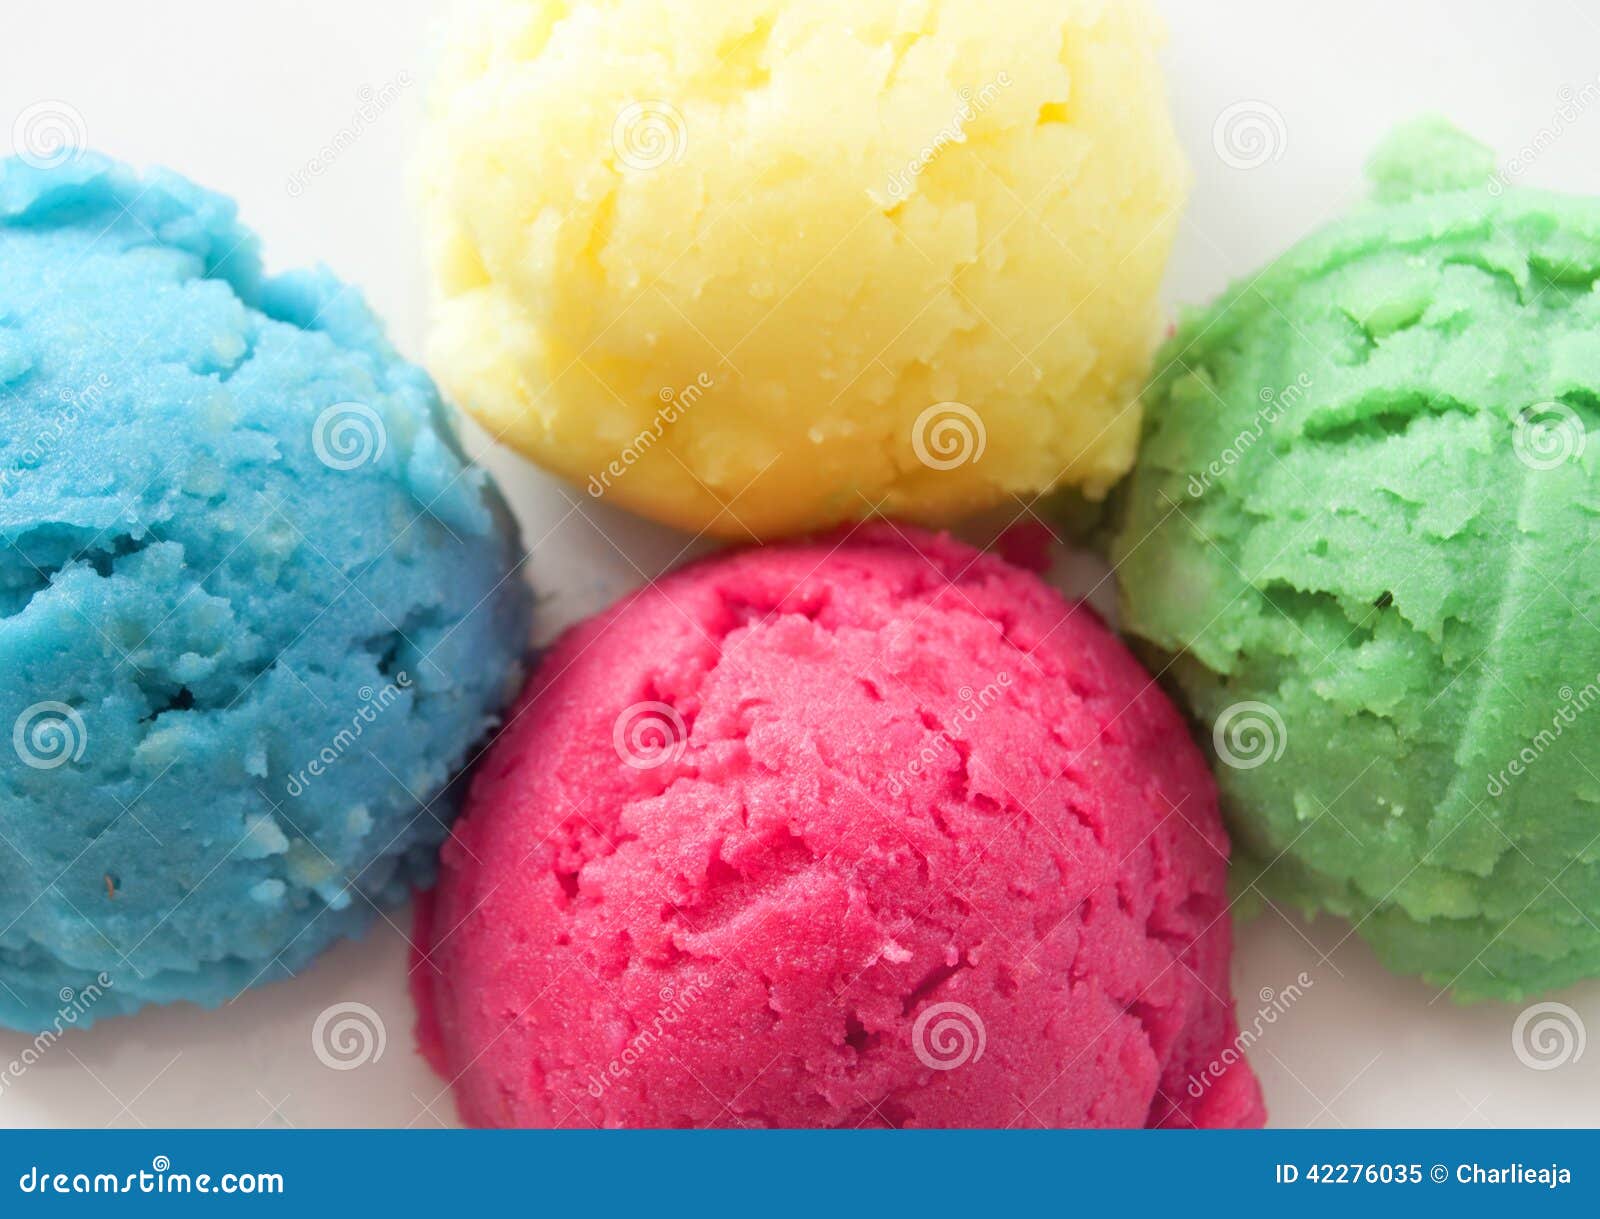 flavored ice cream scoops